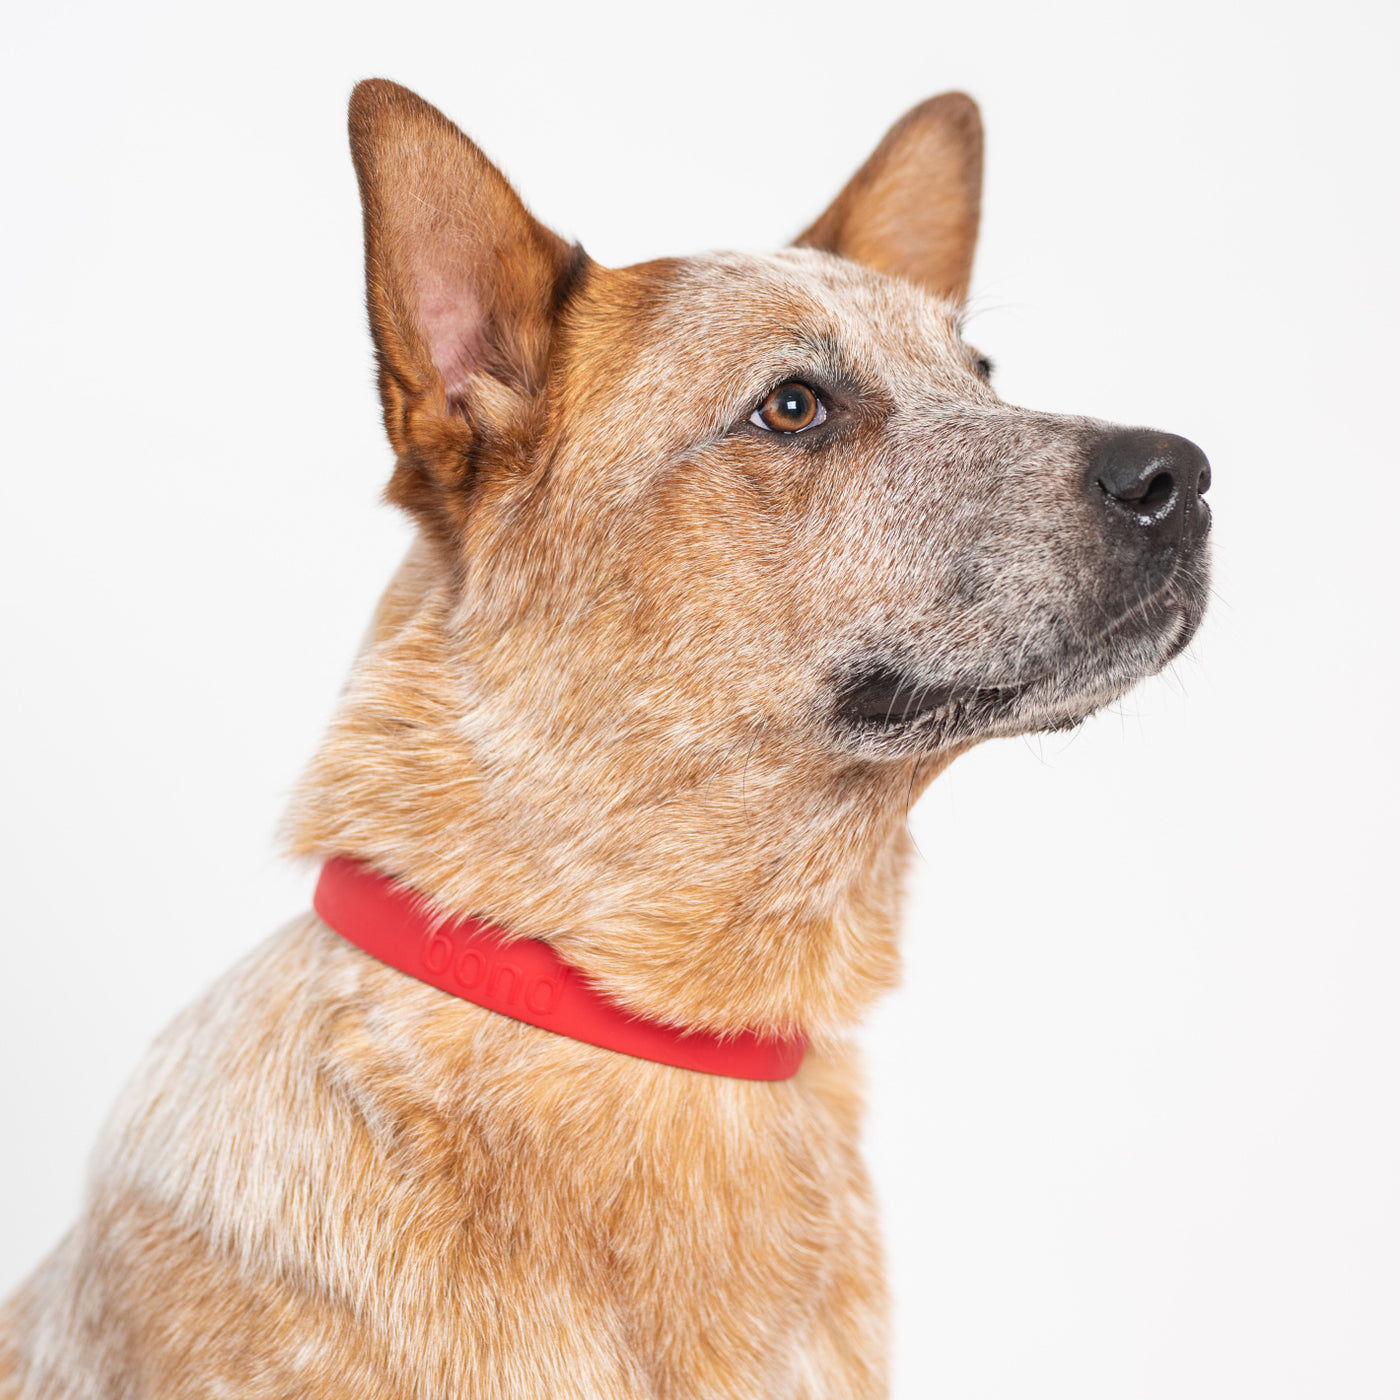 Mixed breed dog posing with red collar